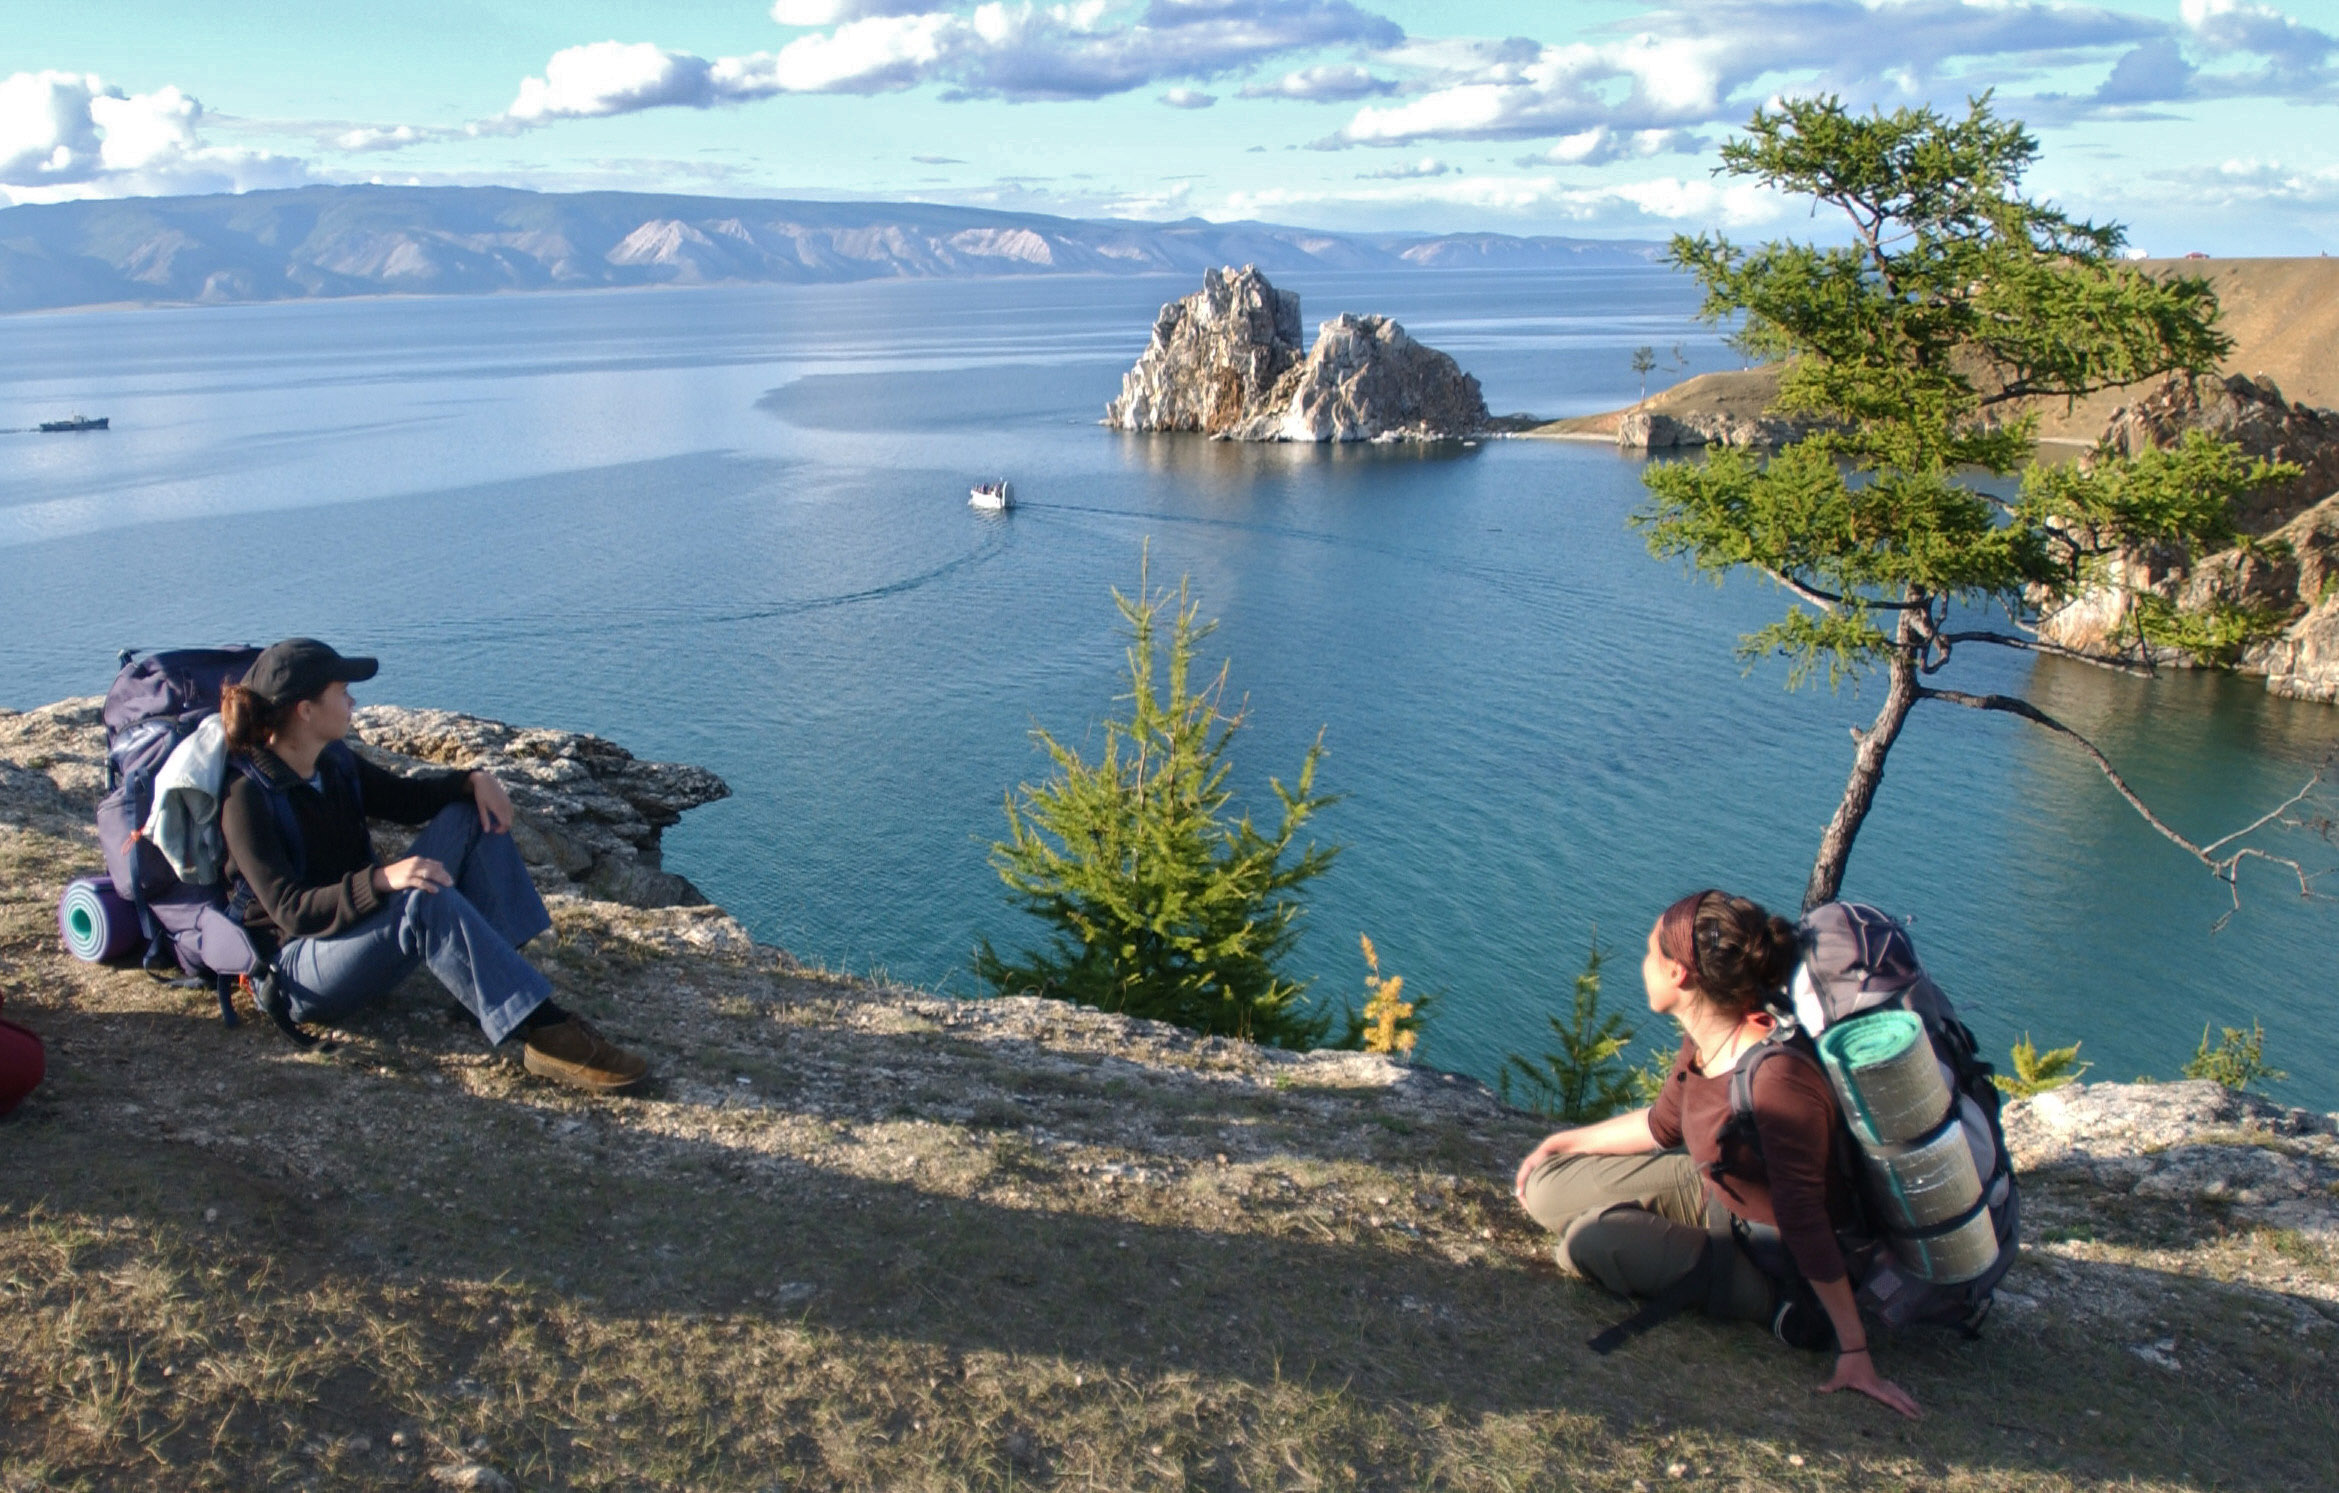 Lake Baikal could become new travel destination for Indians.